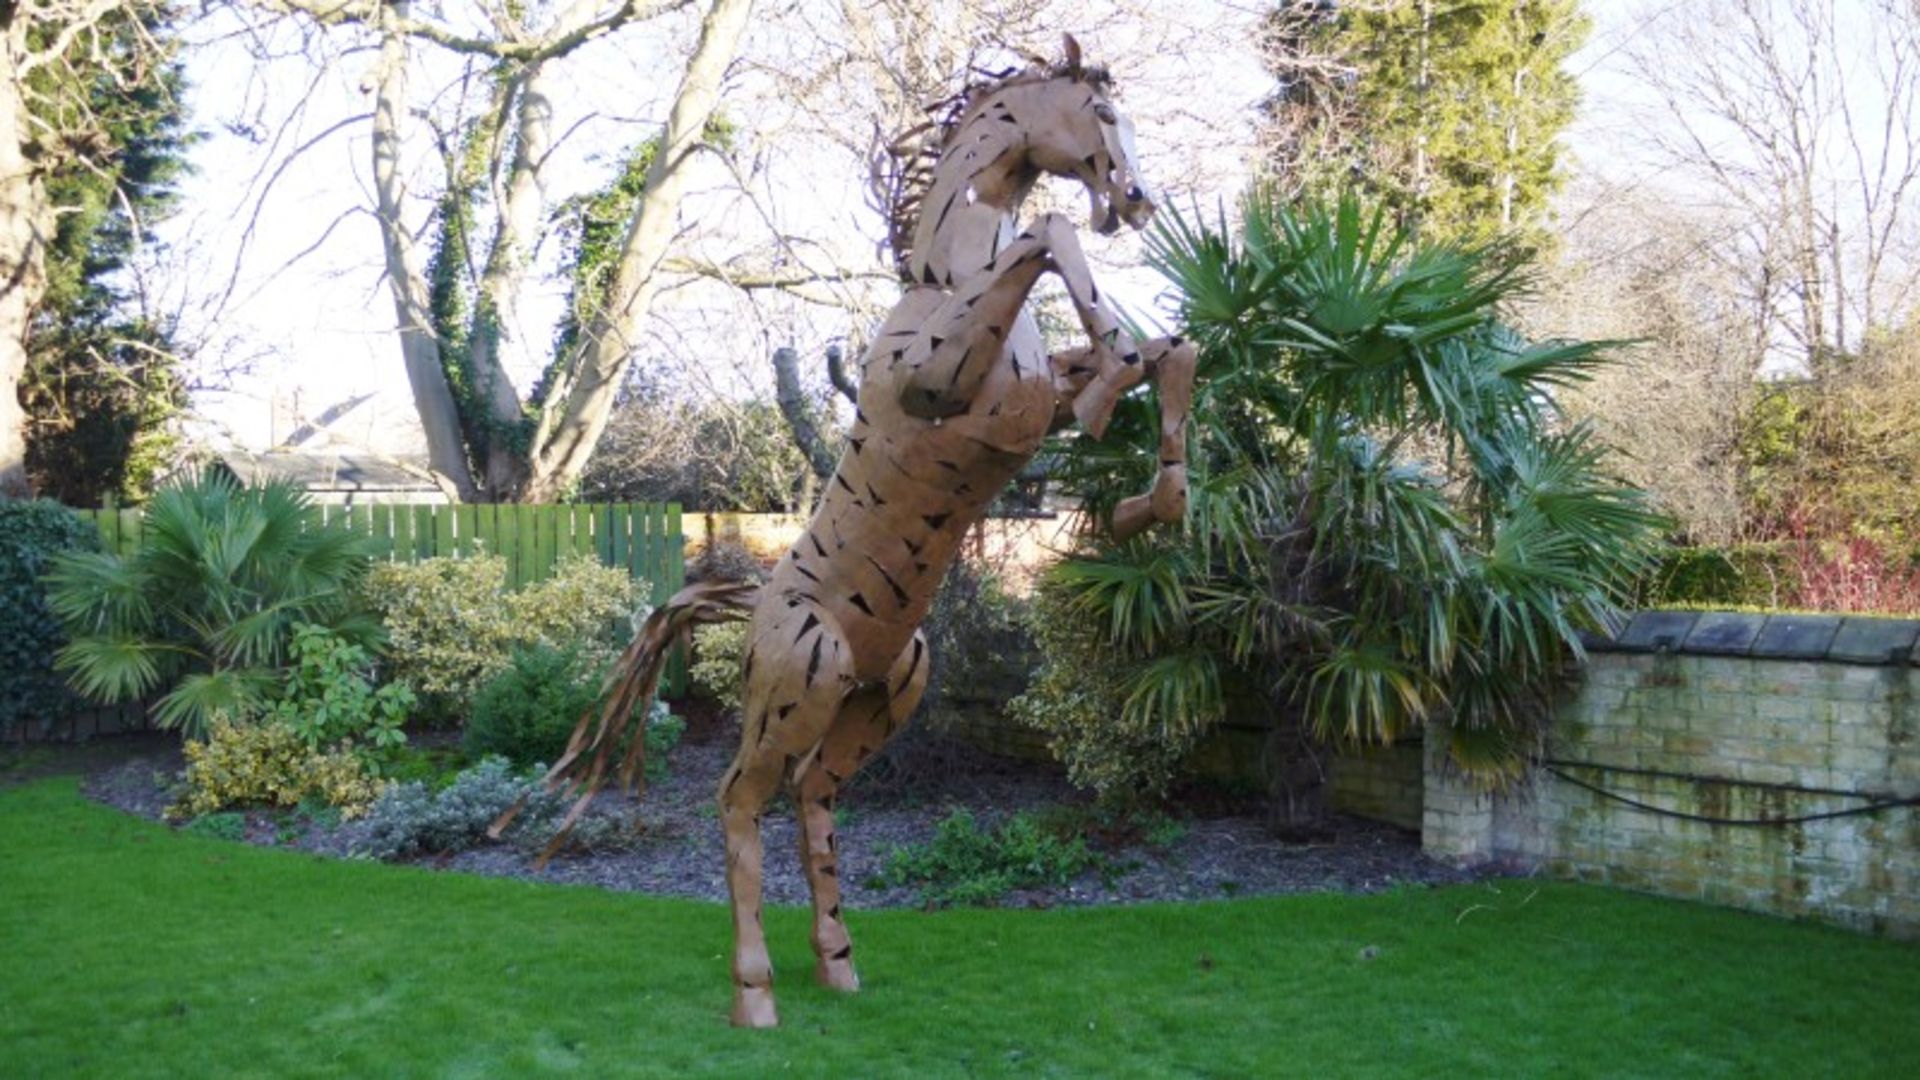 VERY RARE METAL REARING HORSE STATUE- LARGER THAN LIFE - 11 FEET HIGH ! - Image 6 of 6